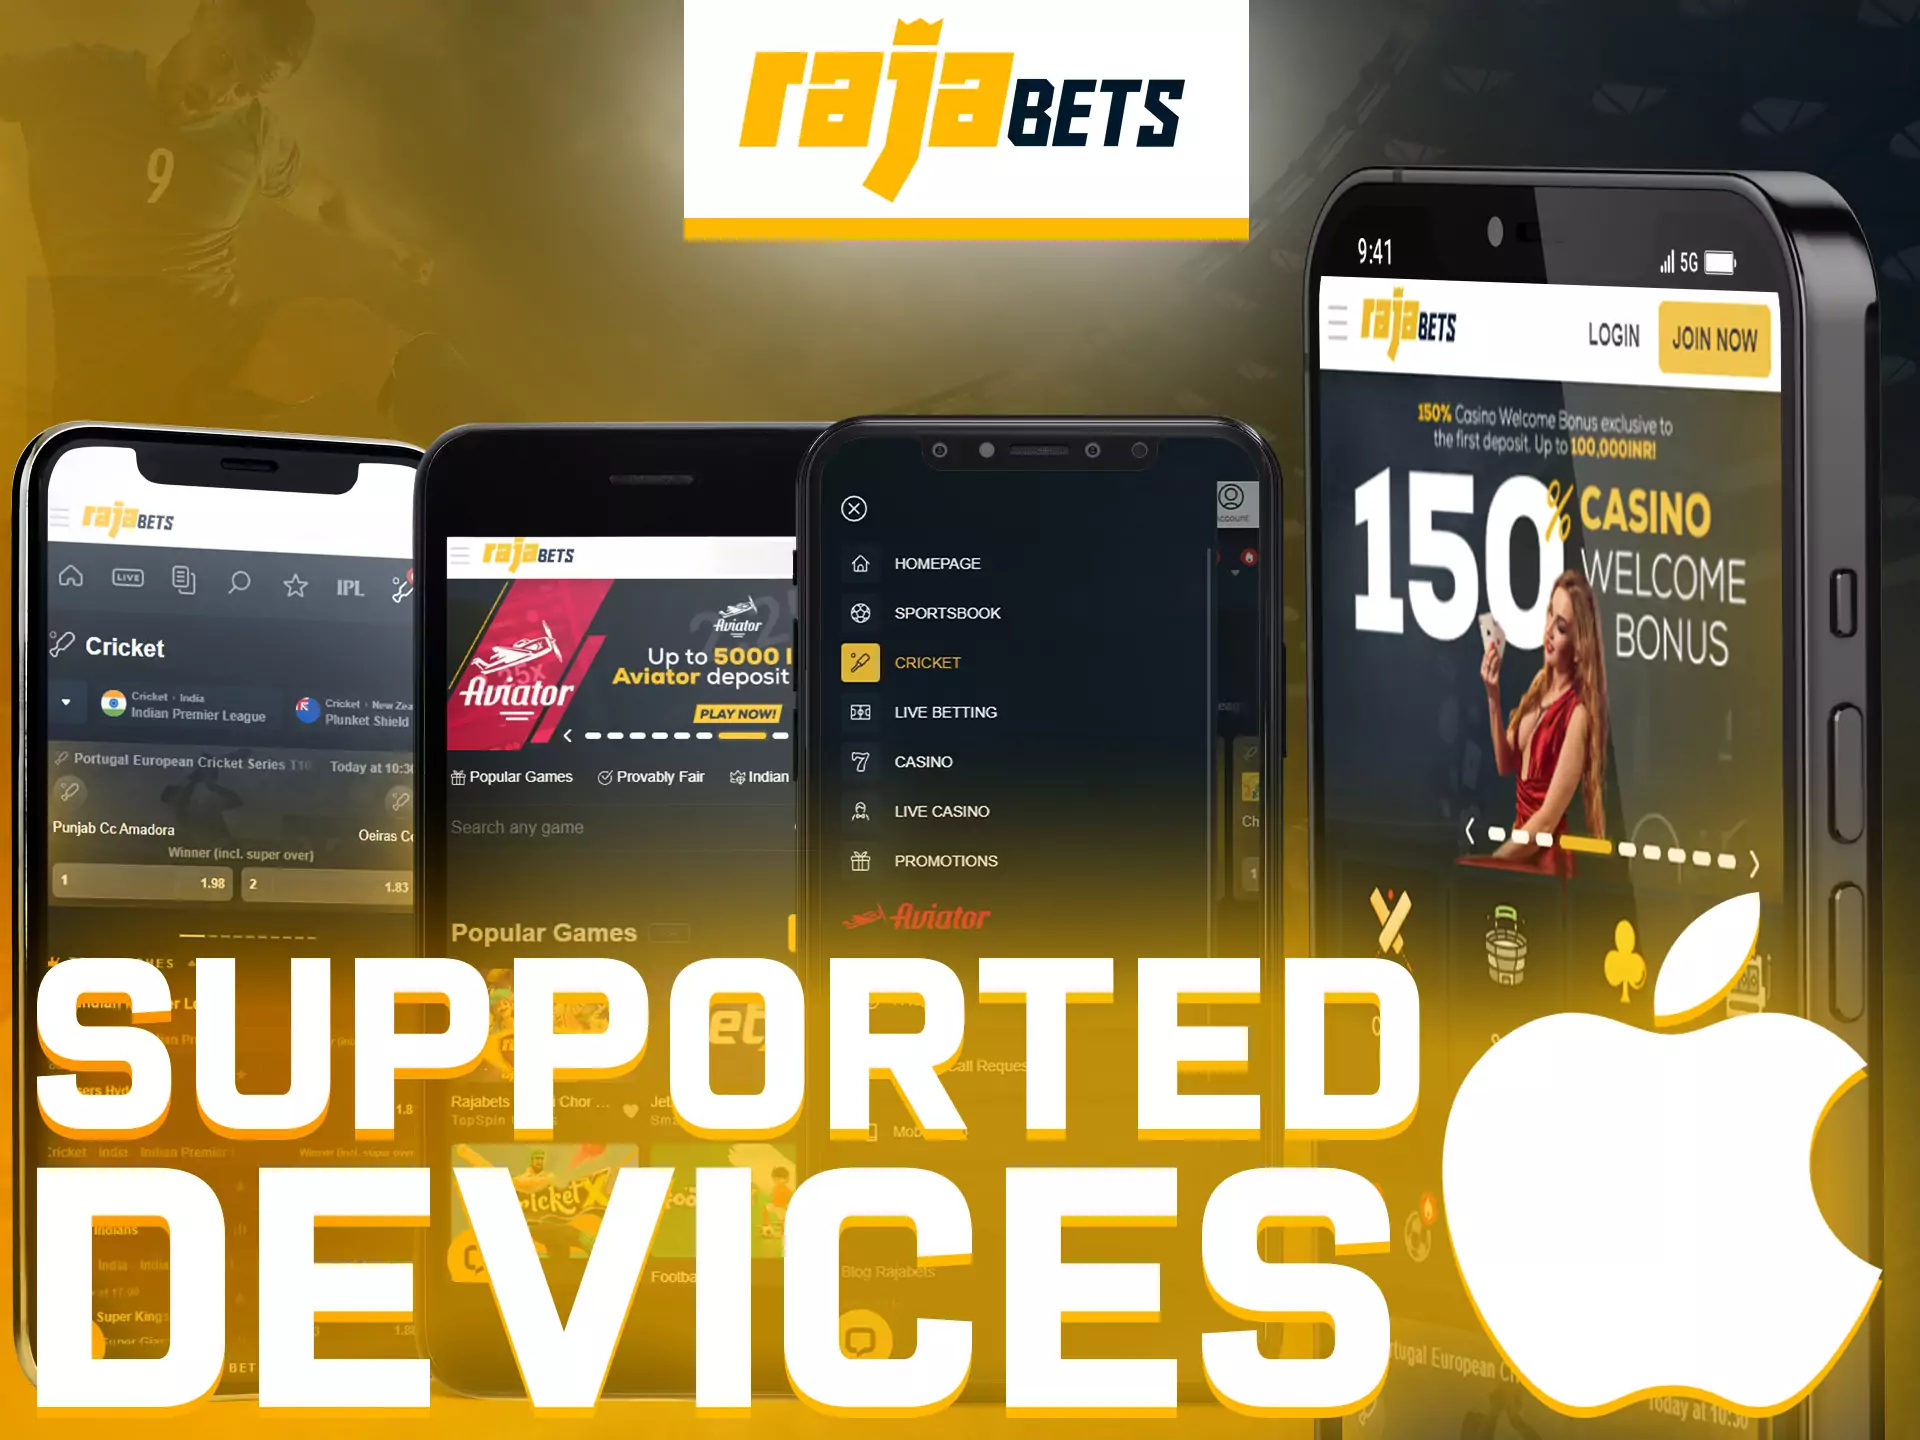 The Rajabets app is supported on various iOS devices.